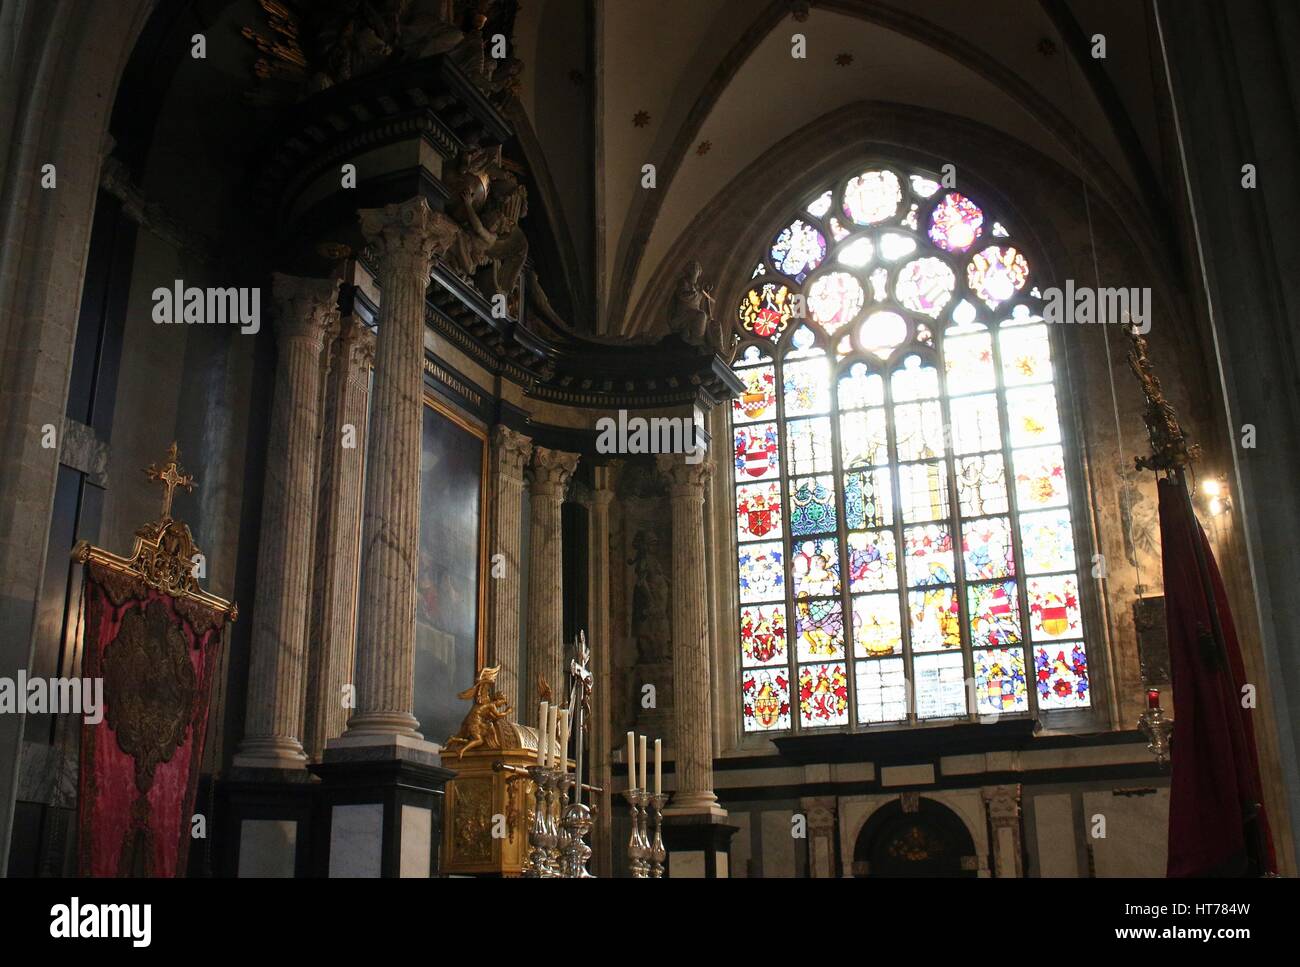 Interior of the Gothic Cathedral of our Lady (Onze-lieve-vrouwekathedraal), Antwerp, Belgium Stock Photo